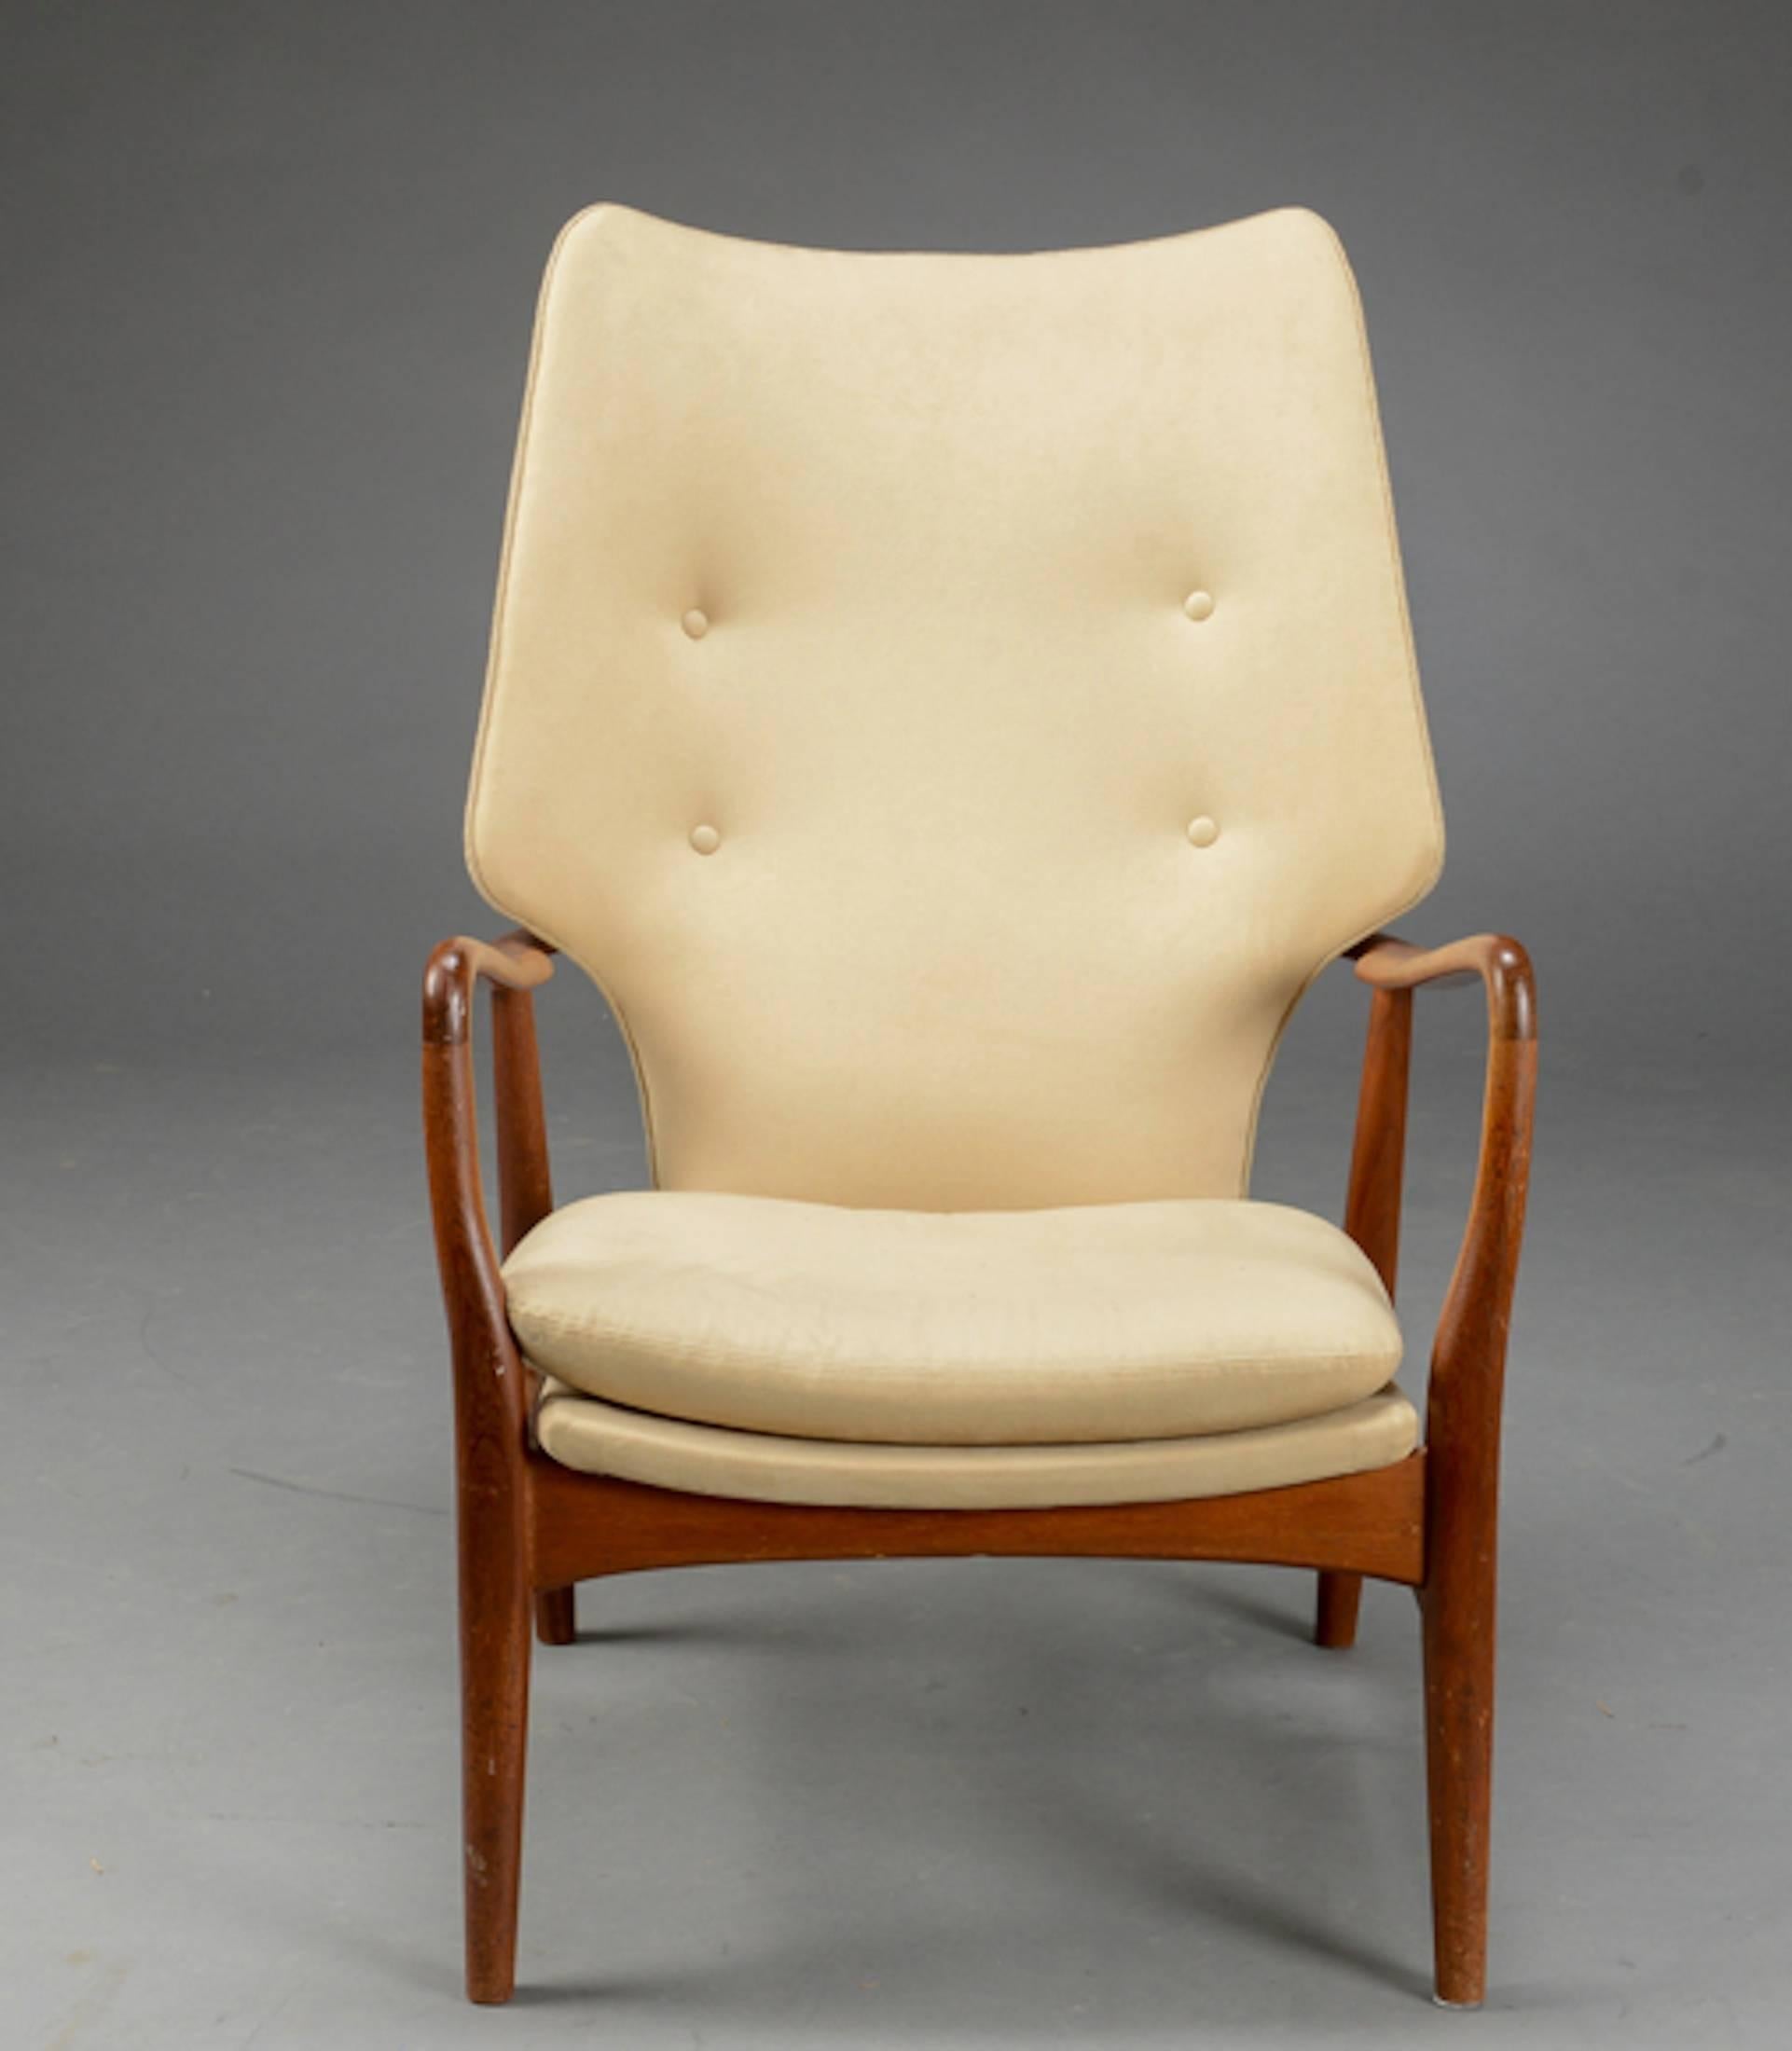 A high-backed Danish armchair designed by Madsen and Shübel .  Teak frame, back, seat and seat cushion upholstered in Alcantara . Excellent condition.